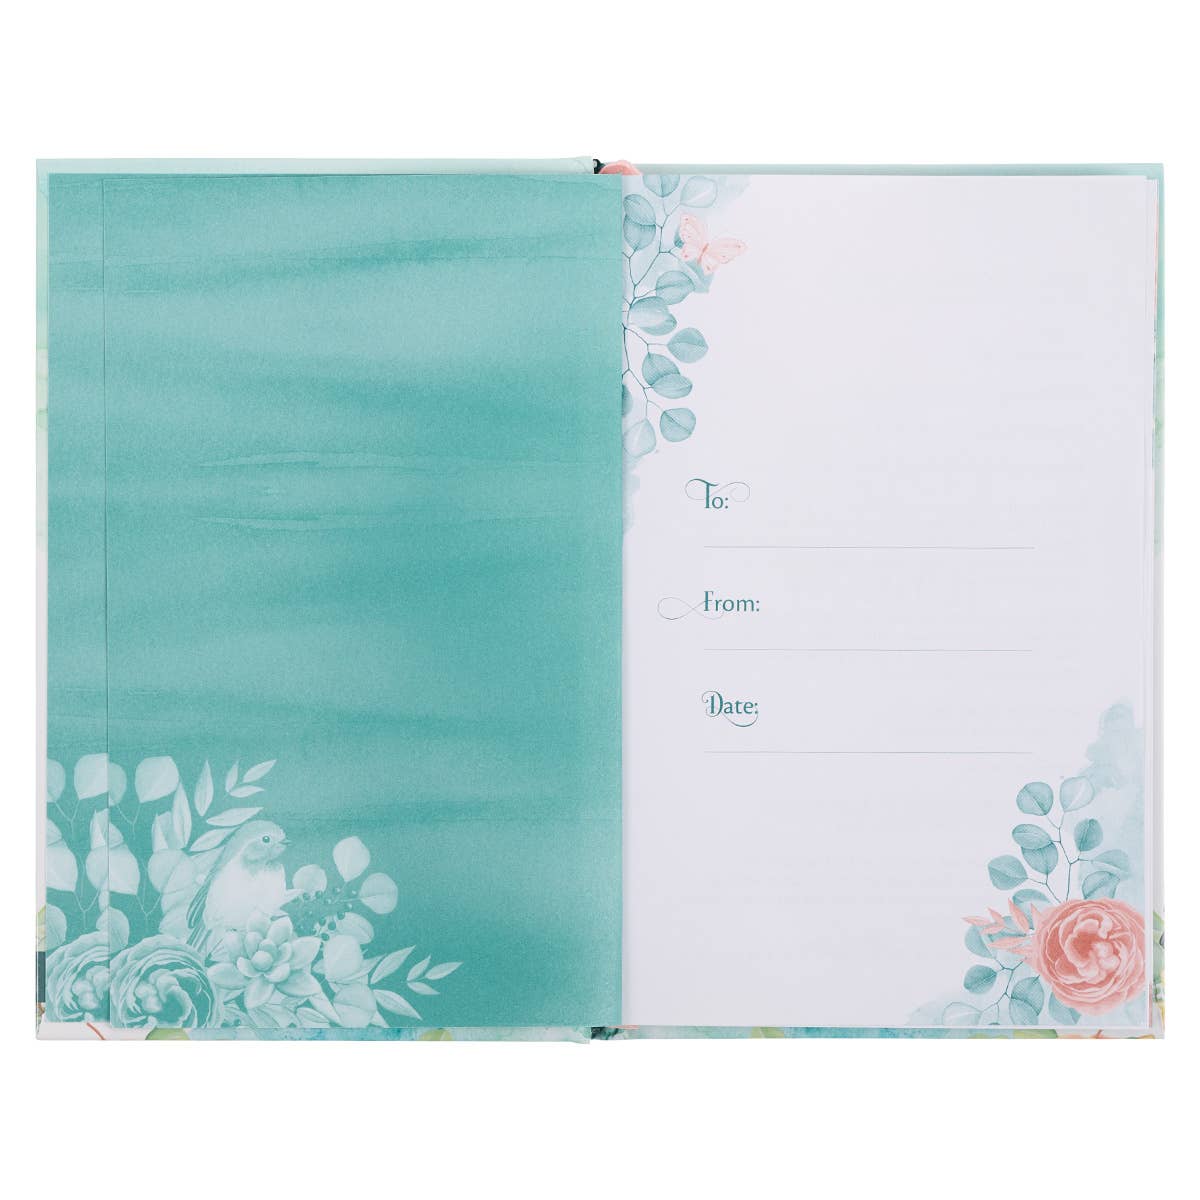 101 Prayers for Women Teal Hardcover Gift Book